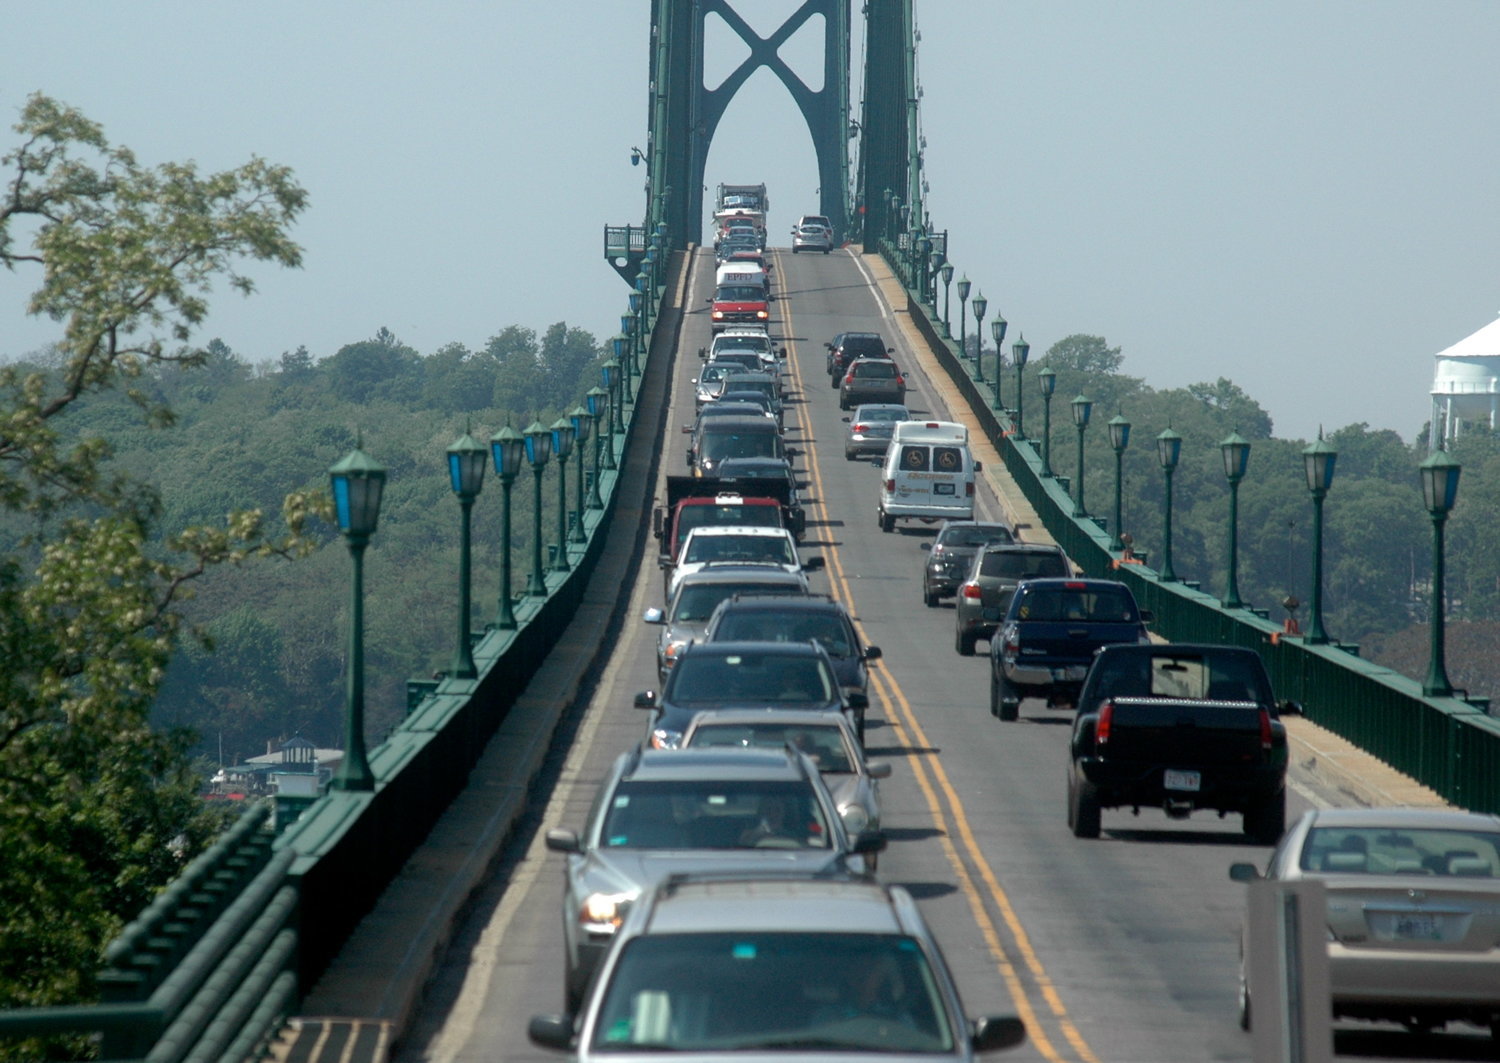 The Town Council on Monday reversed its earlier decision to enter into a one-year pilot program to install automatic license plate readers on the Mt. Hope Bridge to assist police in suicide prevention.